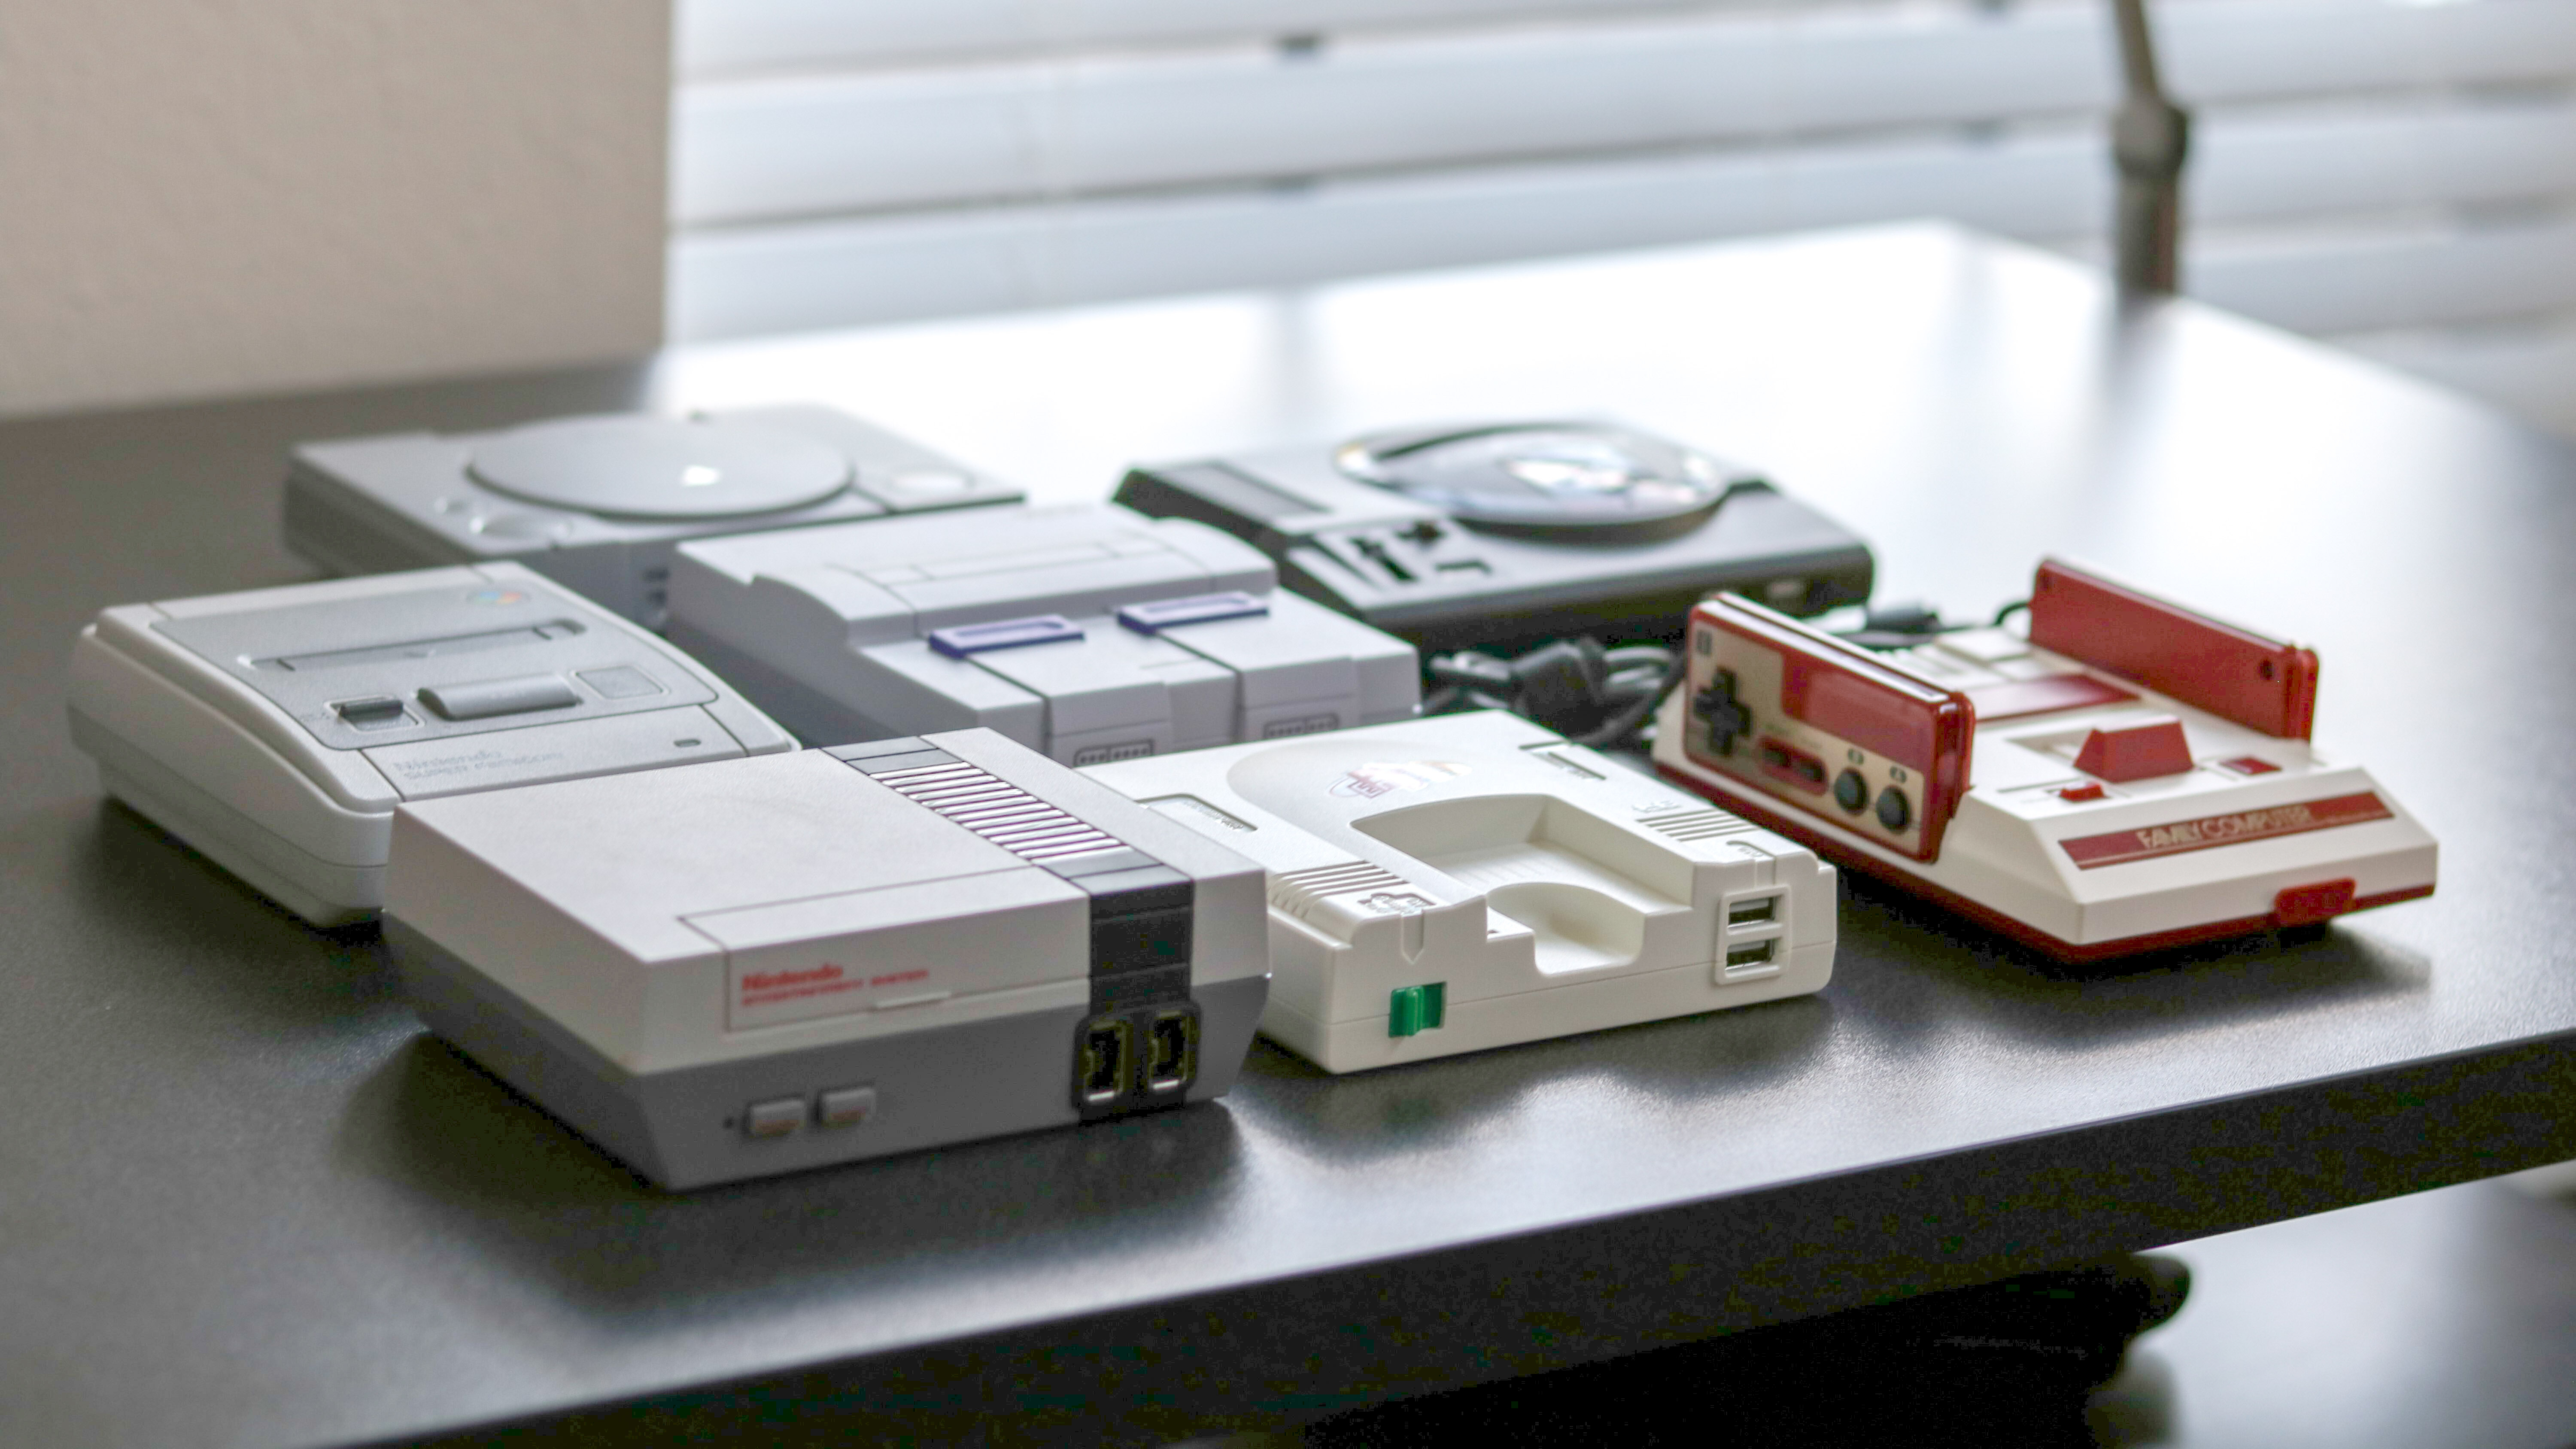 A collection of mini consoles on a desk